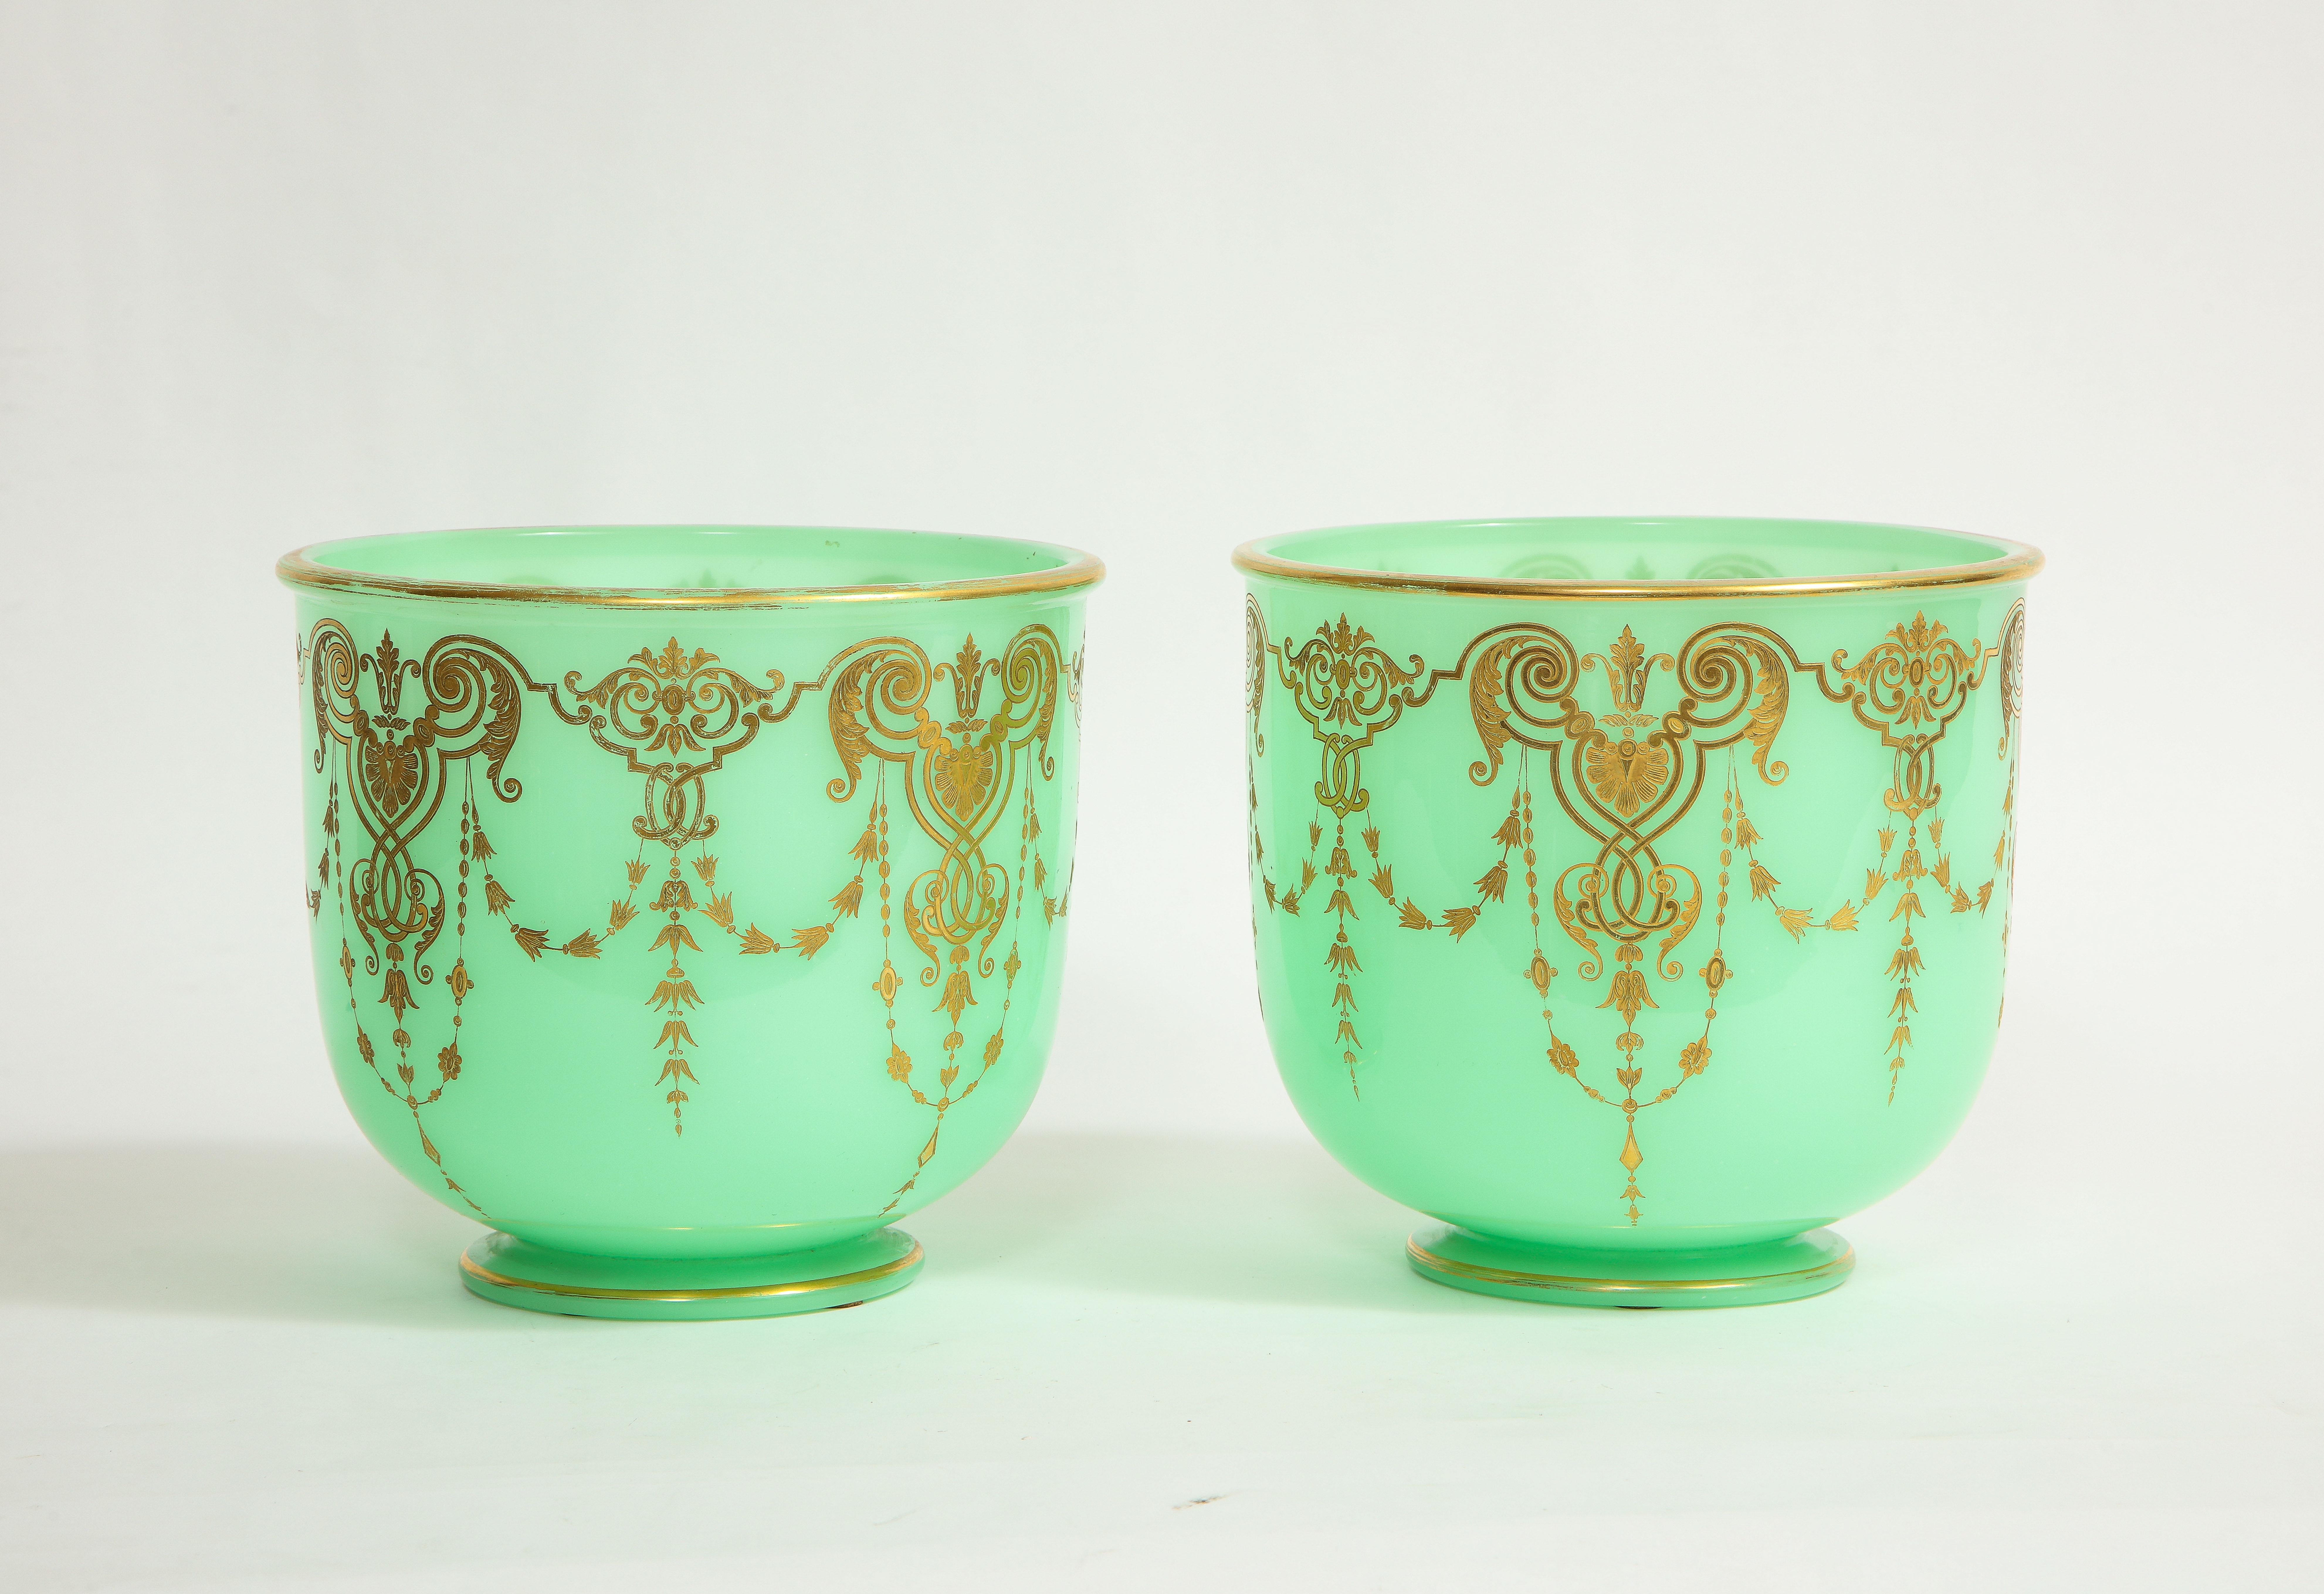 A Fantastic Pair of 19th Century Louis XVI Style French Green Opaline crystal cachepots/wine coolers with hand-engraved Neoclassical decoration and 24K Gilt Decorations. Each is beautifully made of the finest quality of green opalescent crystal and